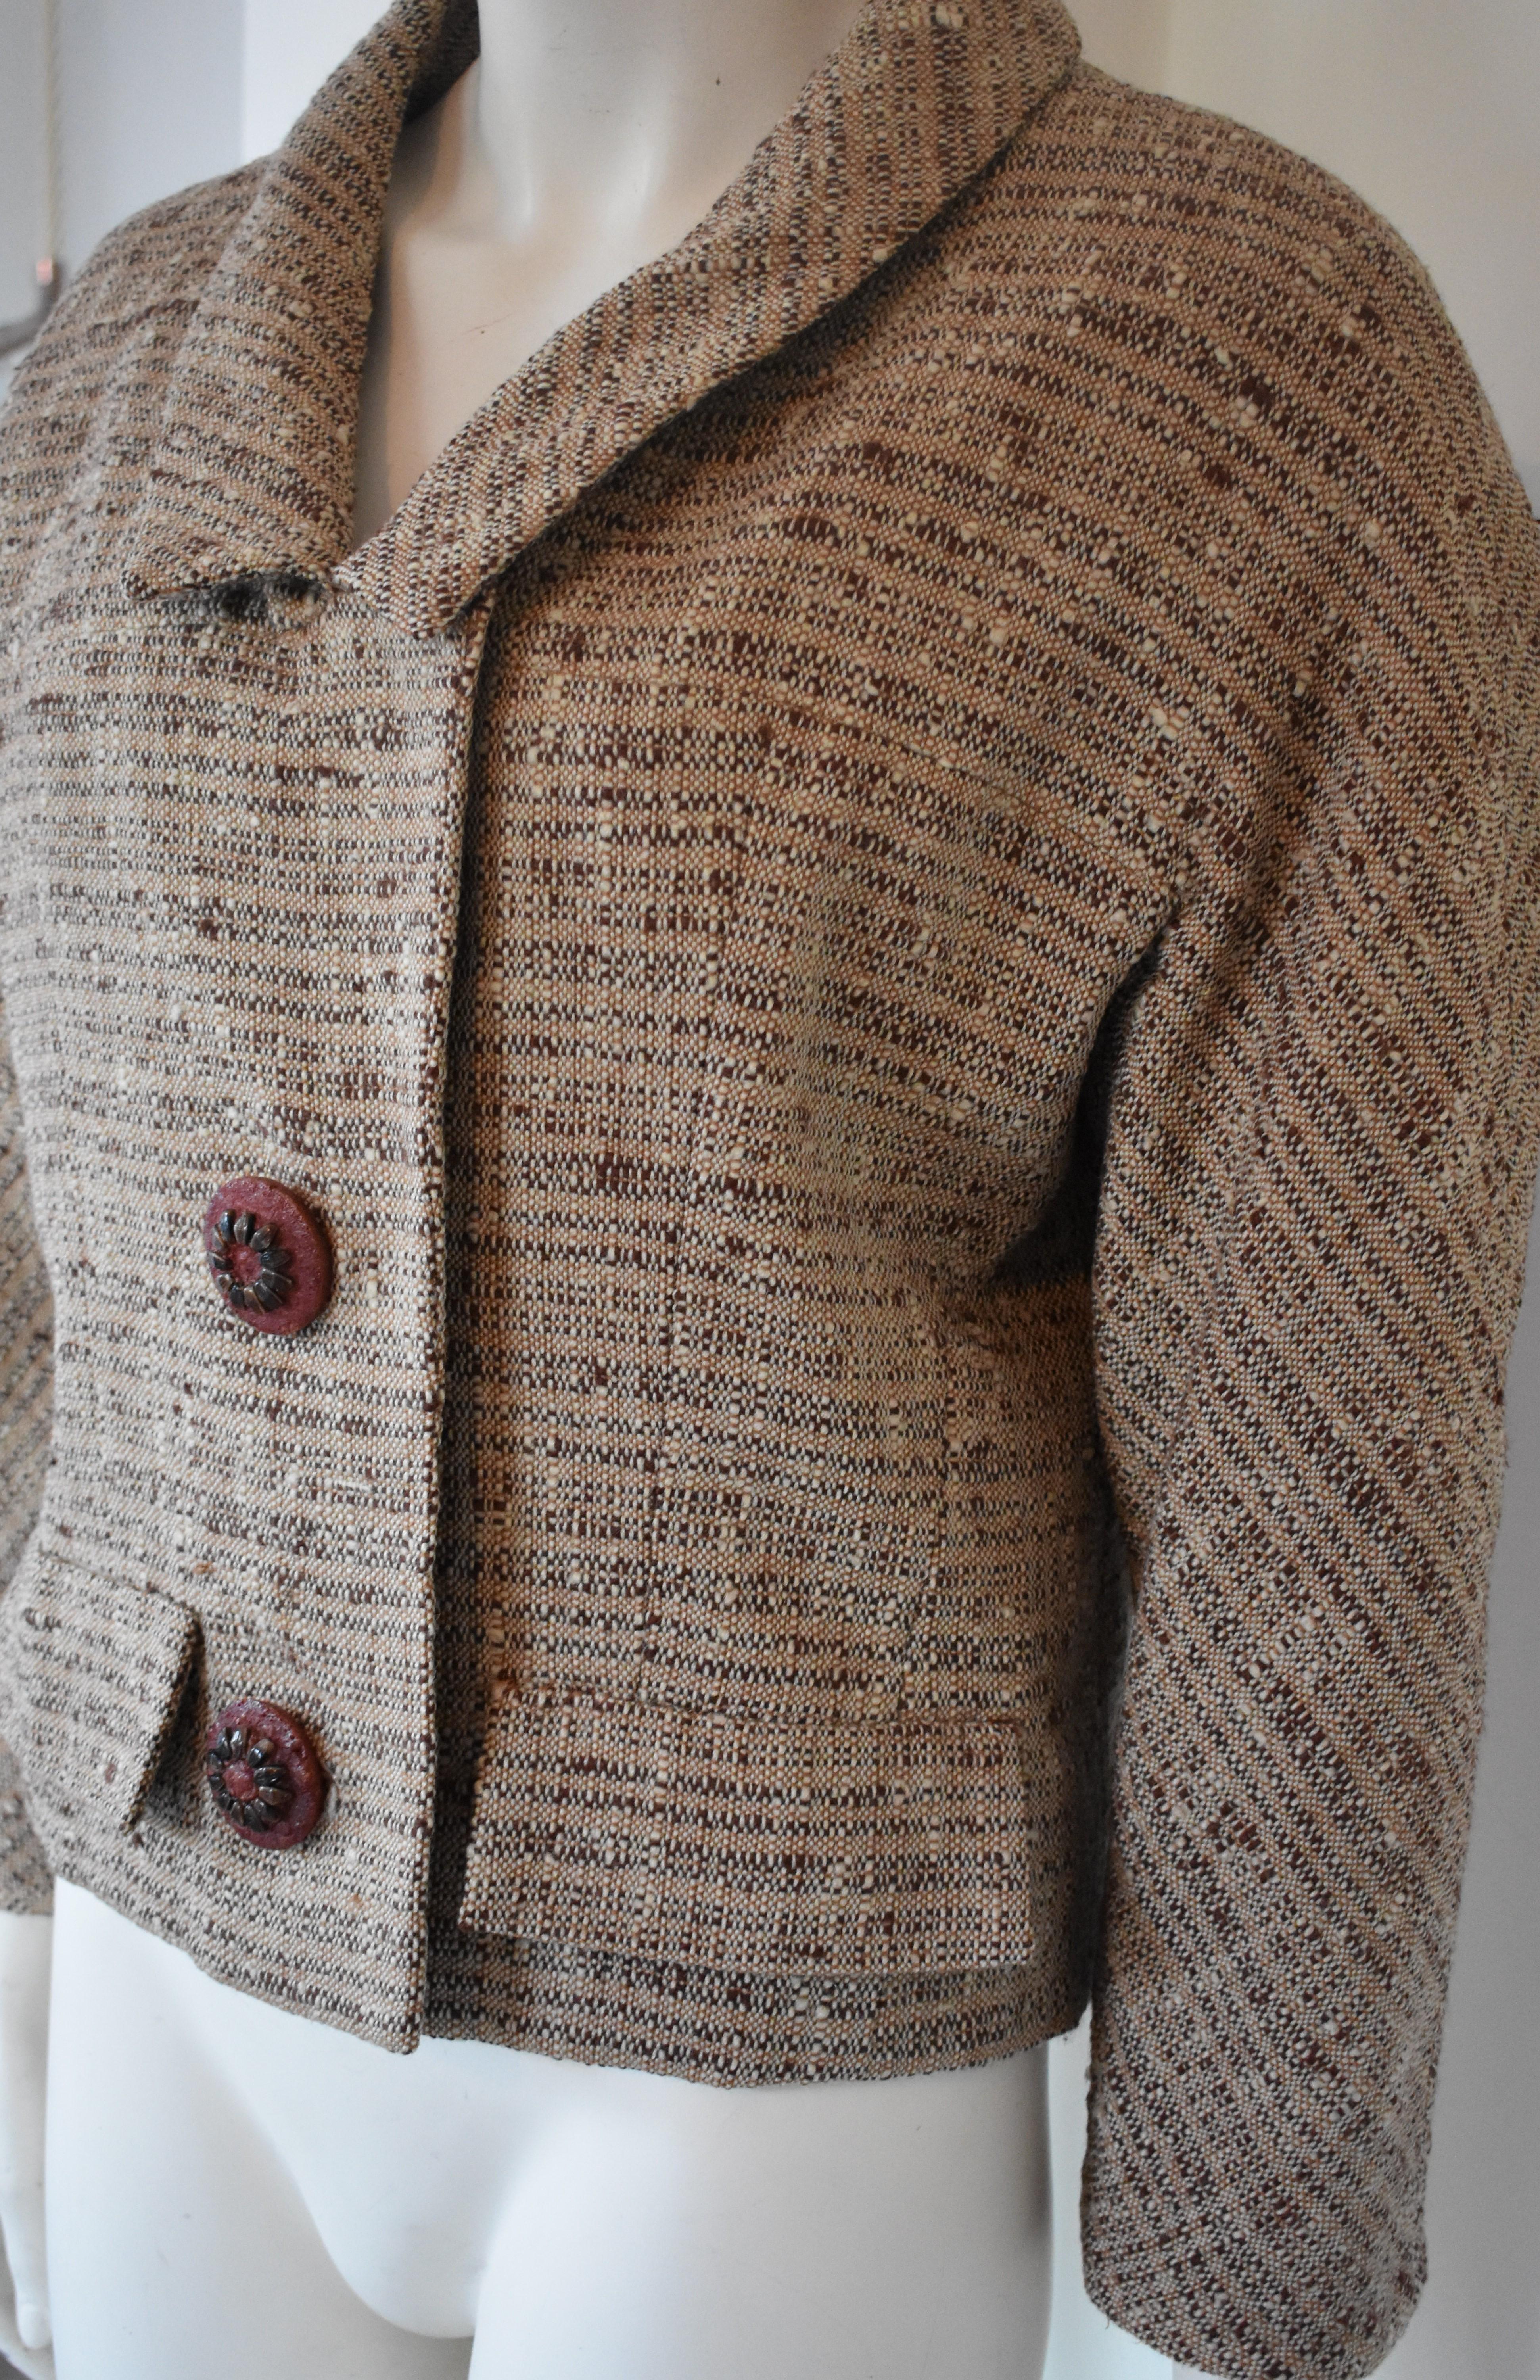 Gray FINAL SALE Givenchy Haute Couture Tweed Jacket Audrey Hepburn Style, Circa 1958 For Sale